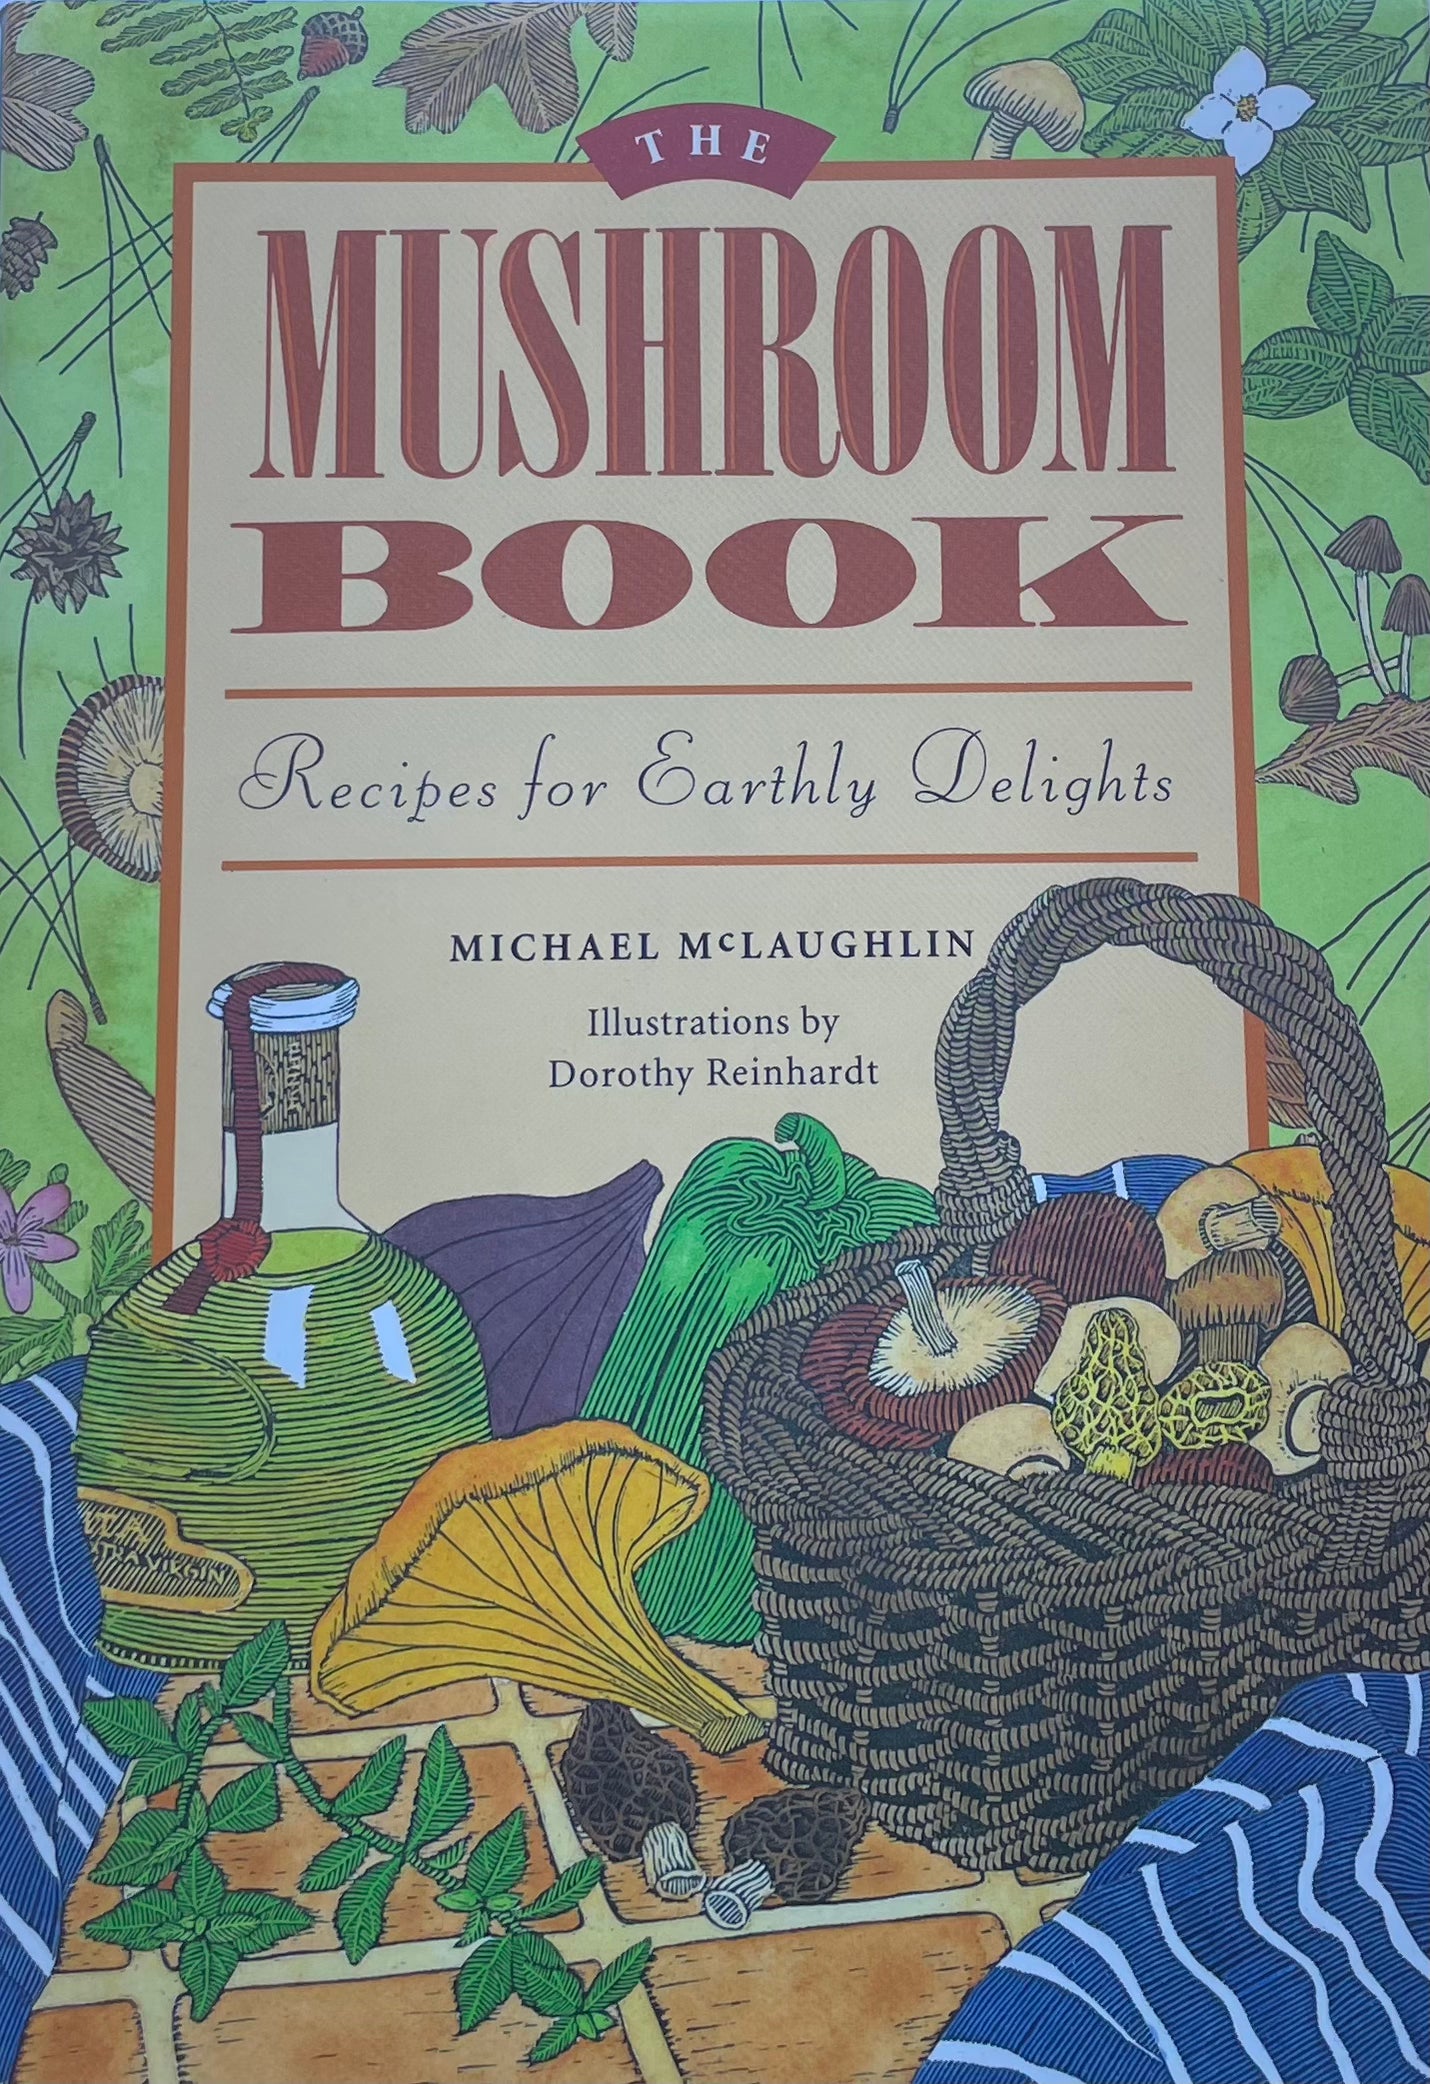 The Mushroom Book: Recipes for Earthly Delights (Michael McLaughlin)